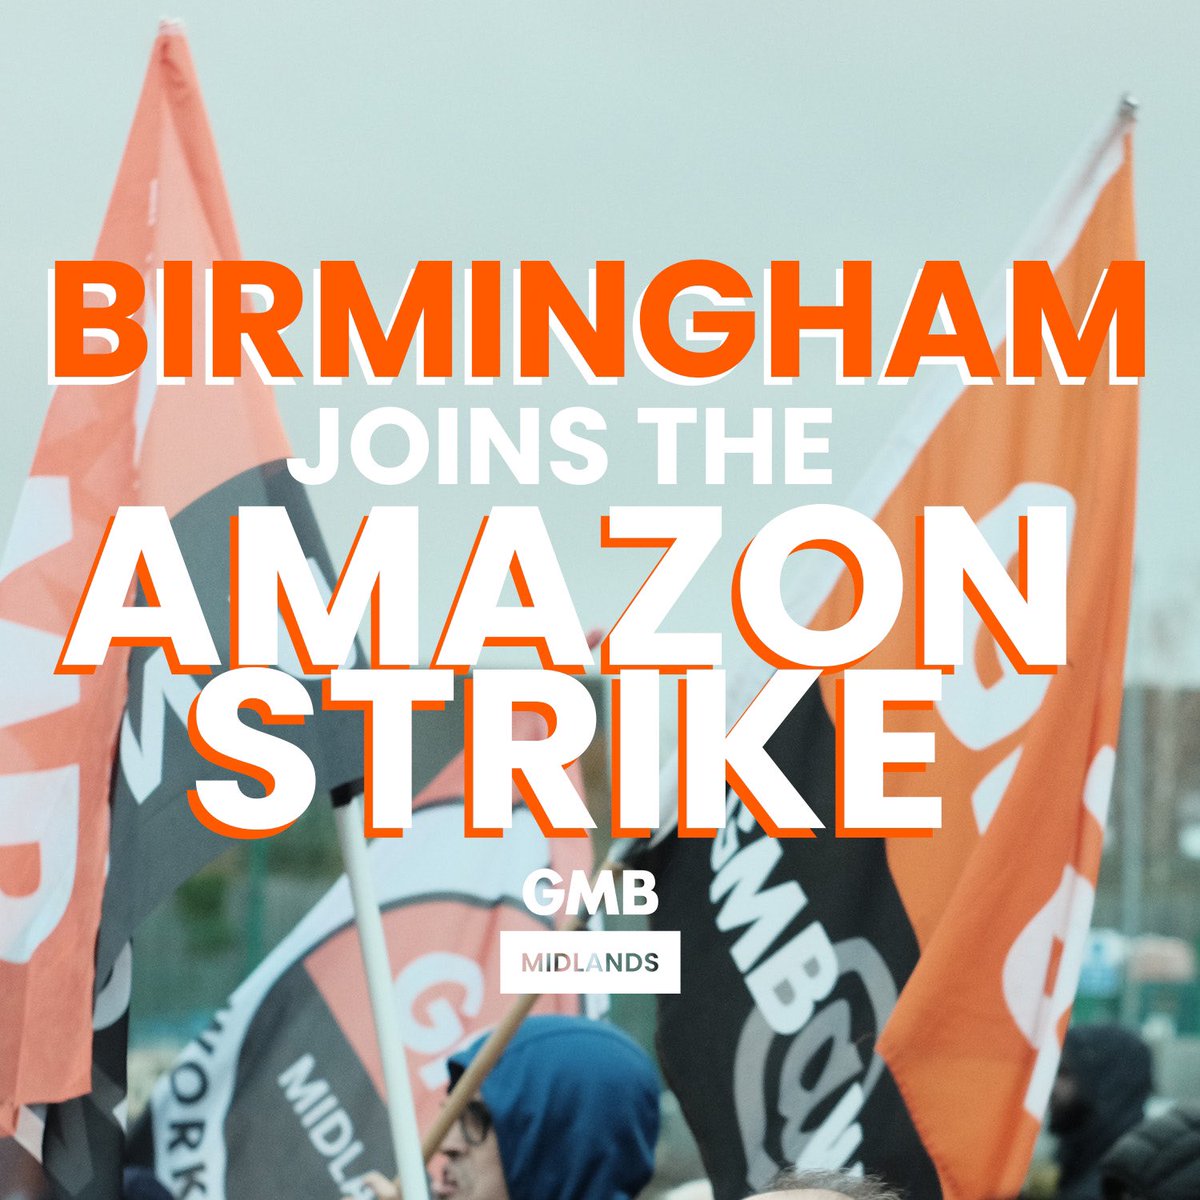 Today workers in Birmingham are joining the Amazon strike. Pressure is building. Amazon workers won’t be beaten. £15 and union rights now.